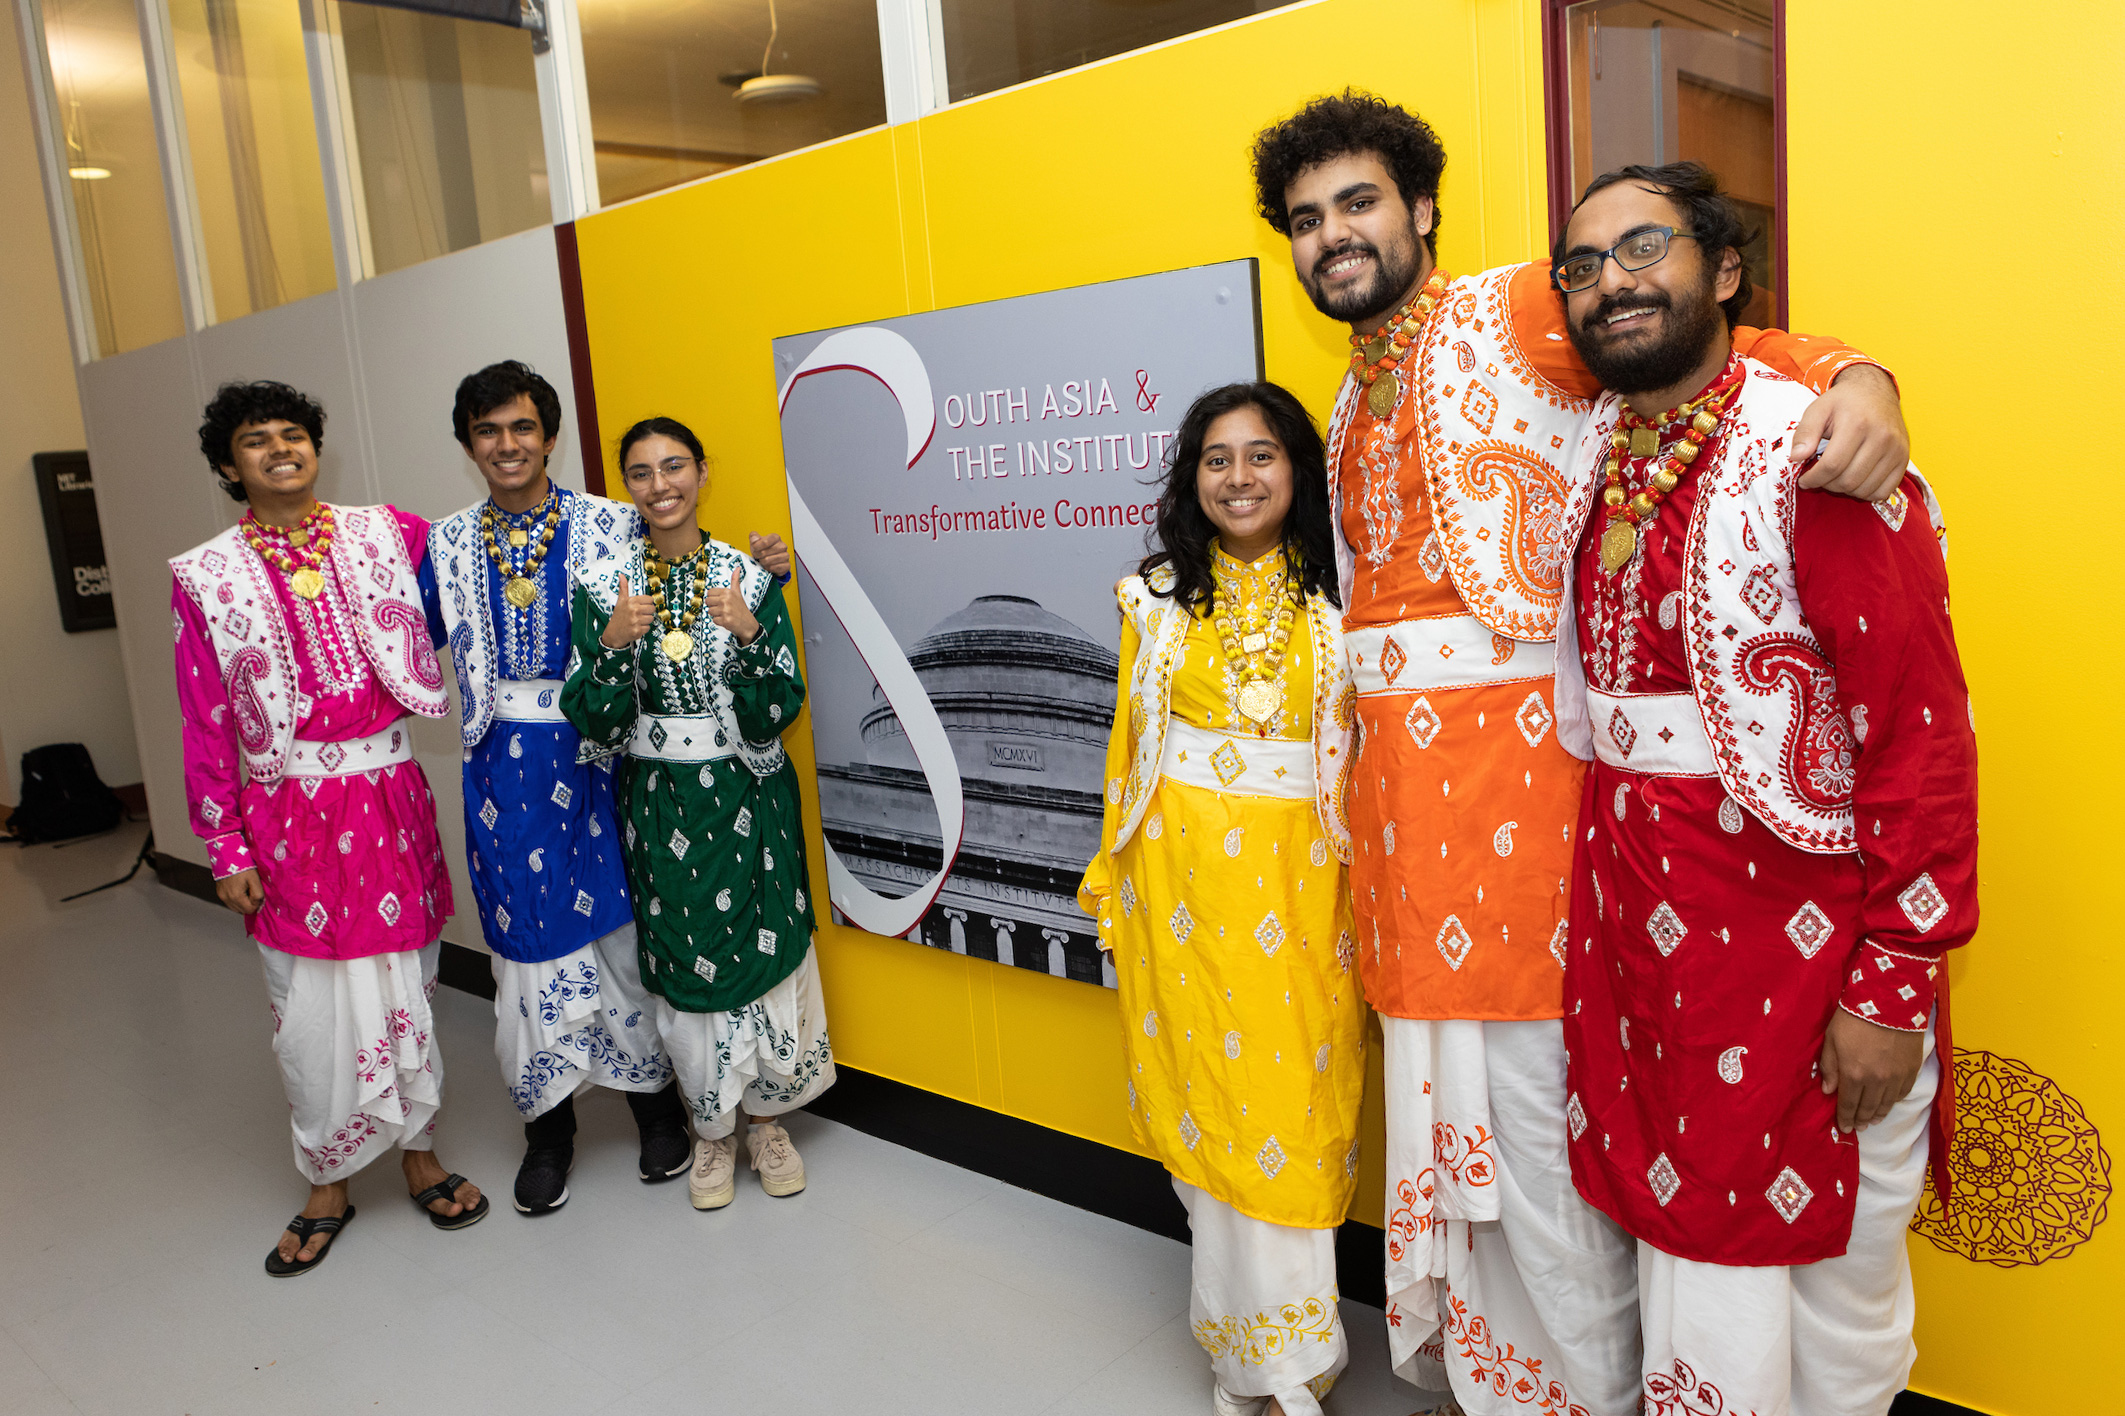 A new exhibit at the Maihaugen Gallery explores the history of South Asians at MIT and how that history intersects with the histories of MIT, South Asia, and the U.S. more broadly. The MIT Bhangra team performed at the opening of the exhibit.